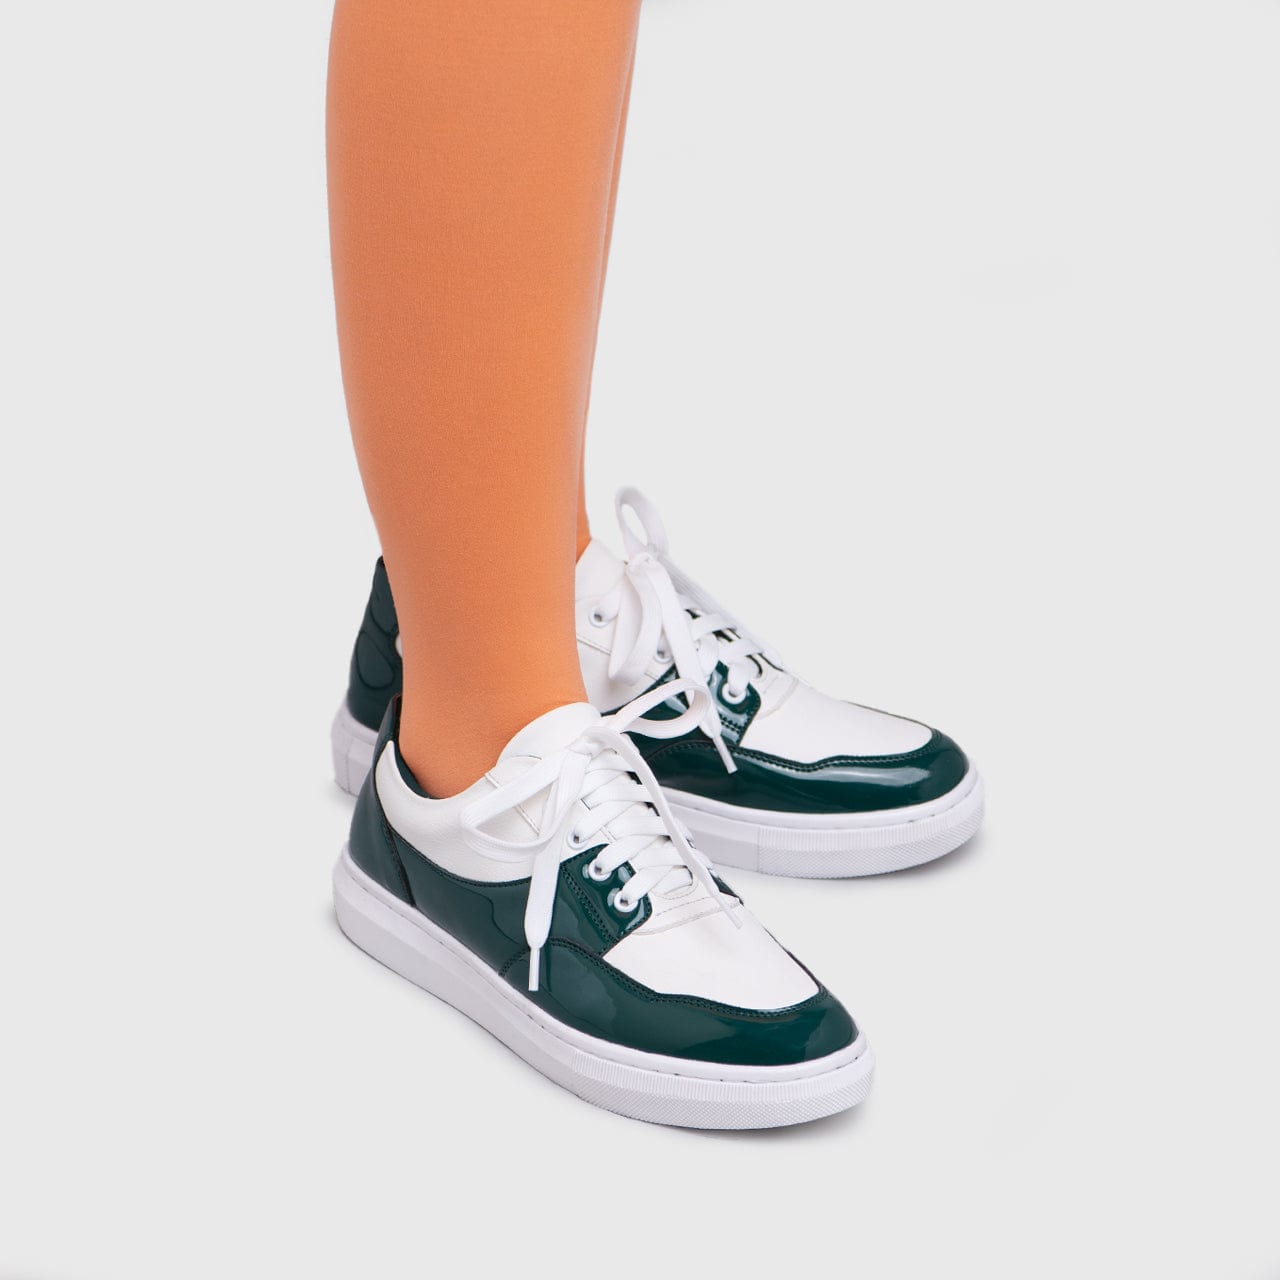 Adorable Projects Official Adorableprojects - Creatsy Sneakers White Green - Sneakers Kasual